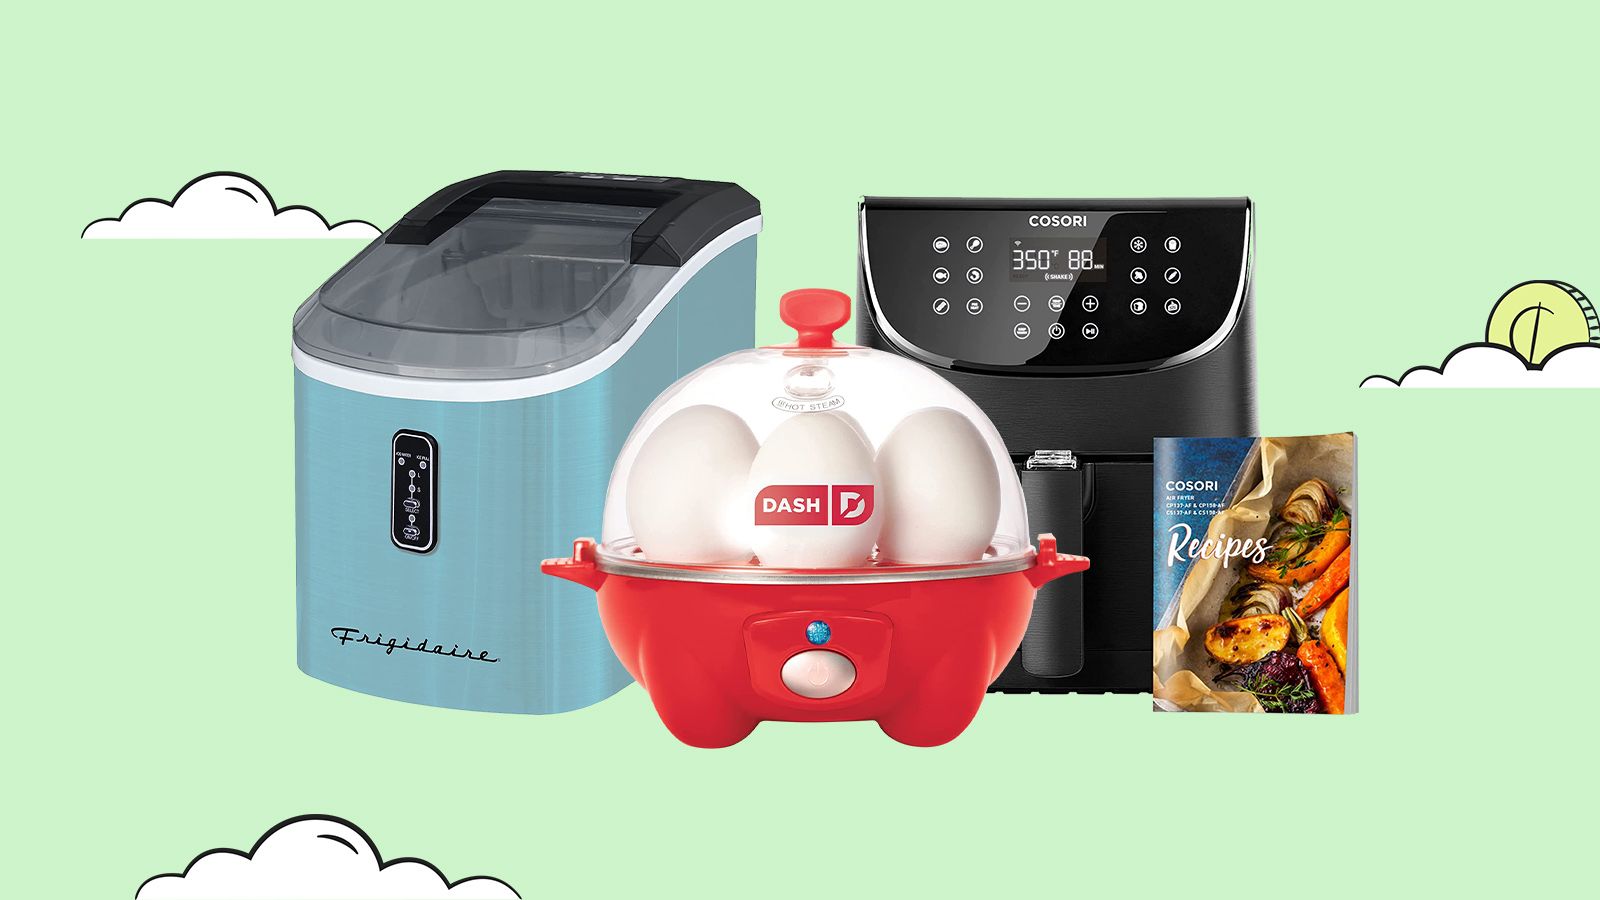 Hot right now: Must-have deals on top trending appliances